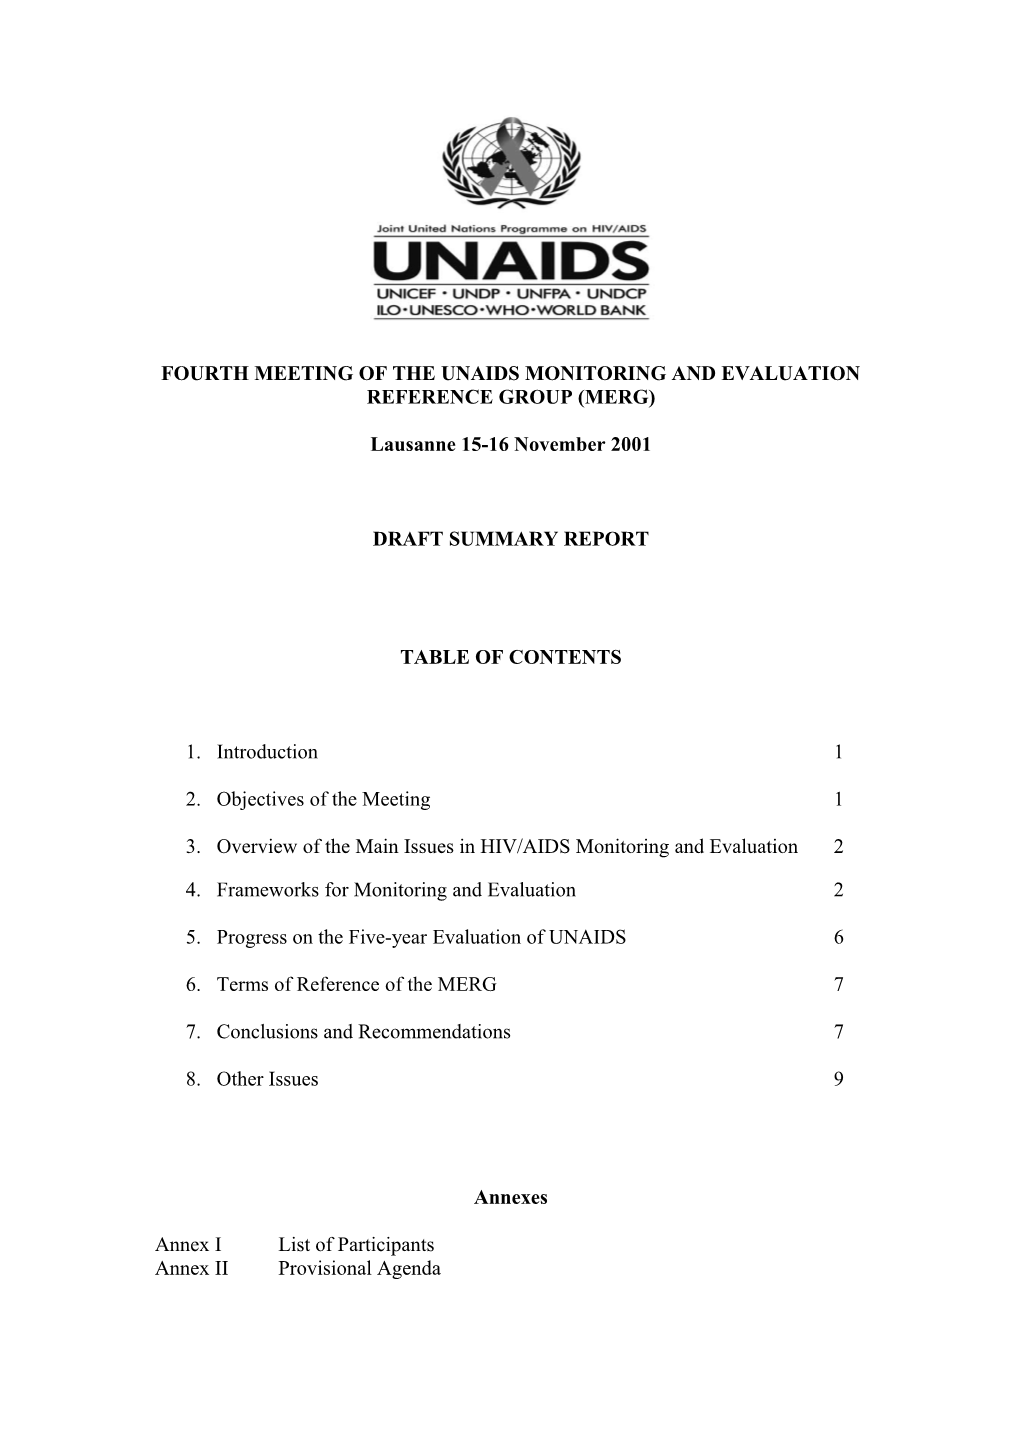 Fourth Meeting of the UNAIDS Monitoring and Evaluation Reference Group (MERG) : Lausanne